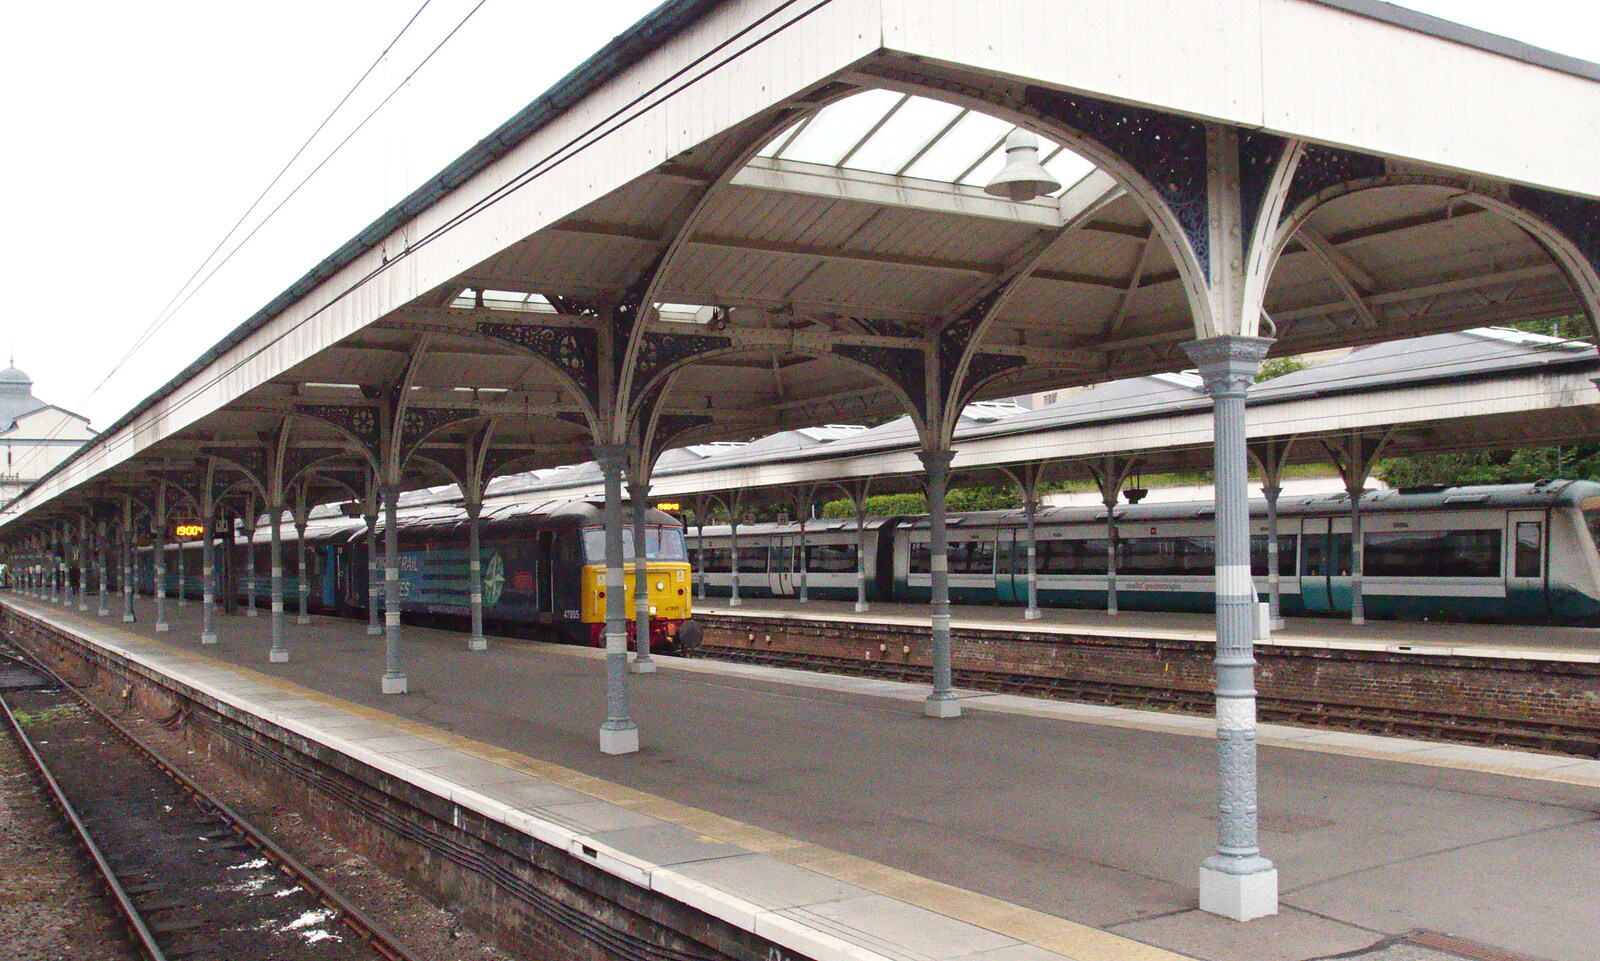 Platforms at Norwich station from Railway Hell: A Pantograph Story, Chelmsford, Essex - 17th June 2014